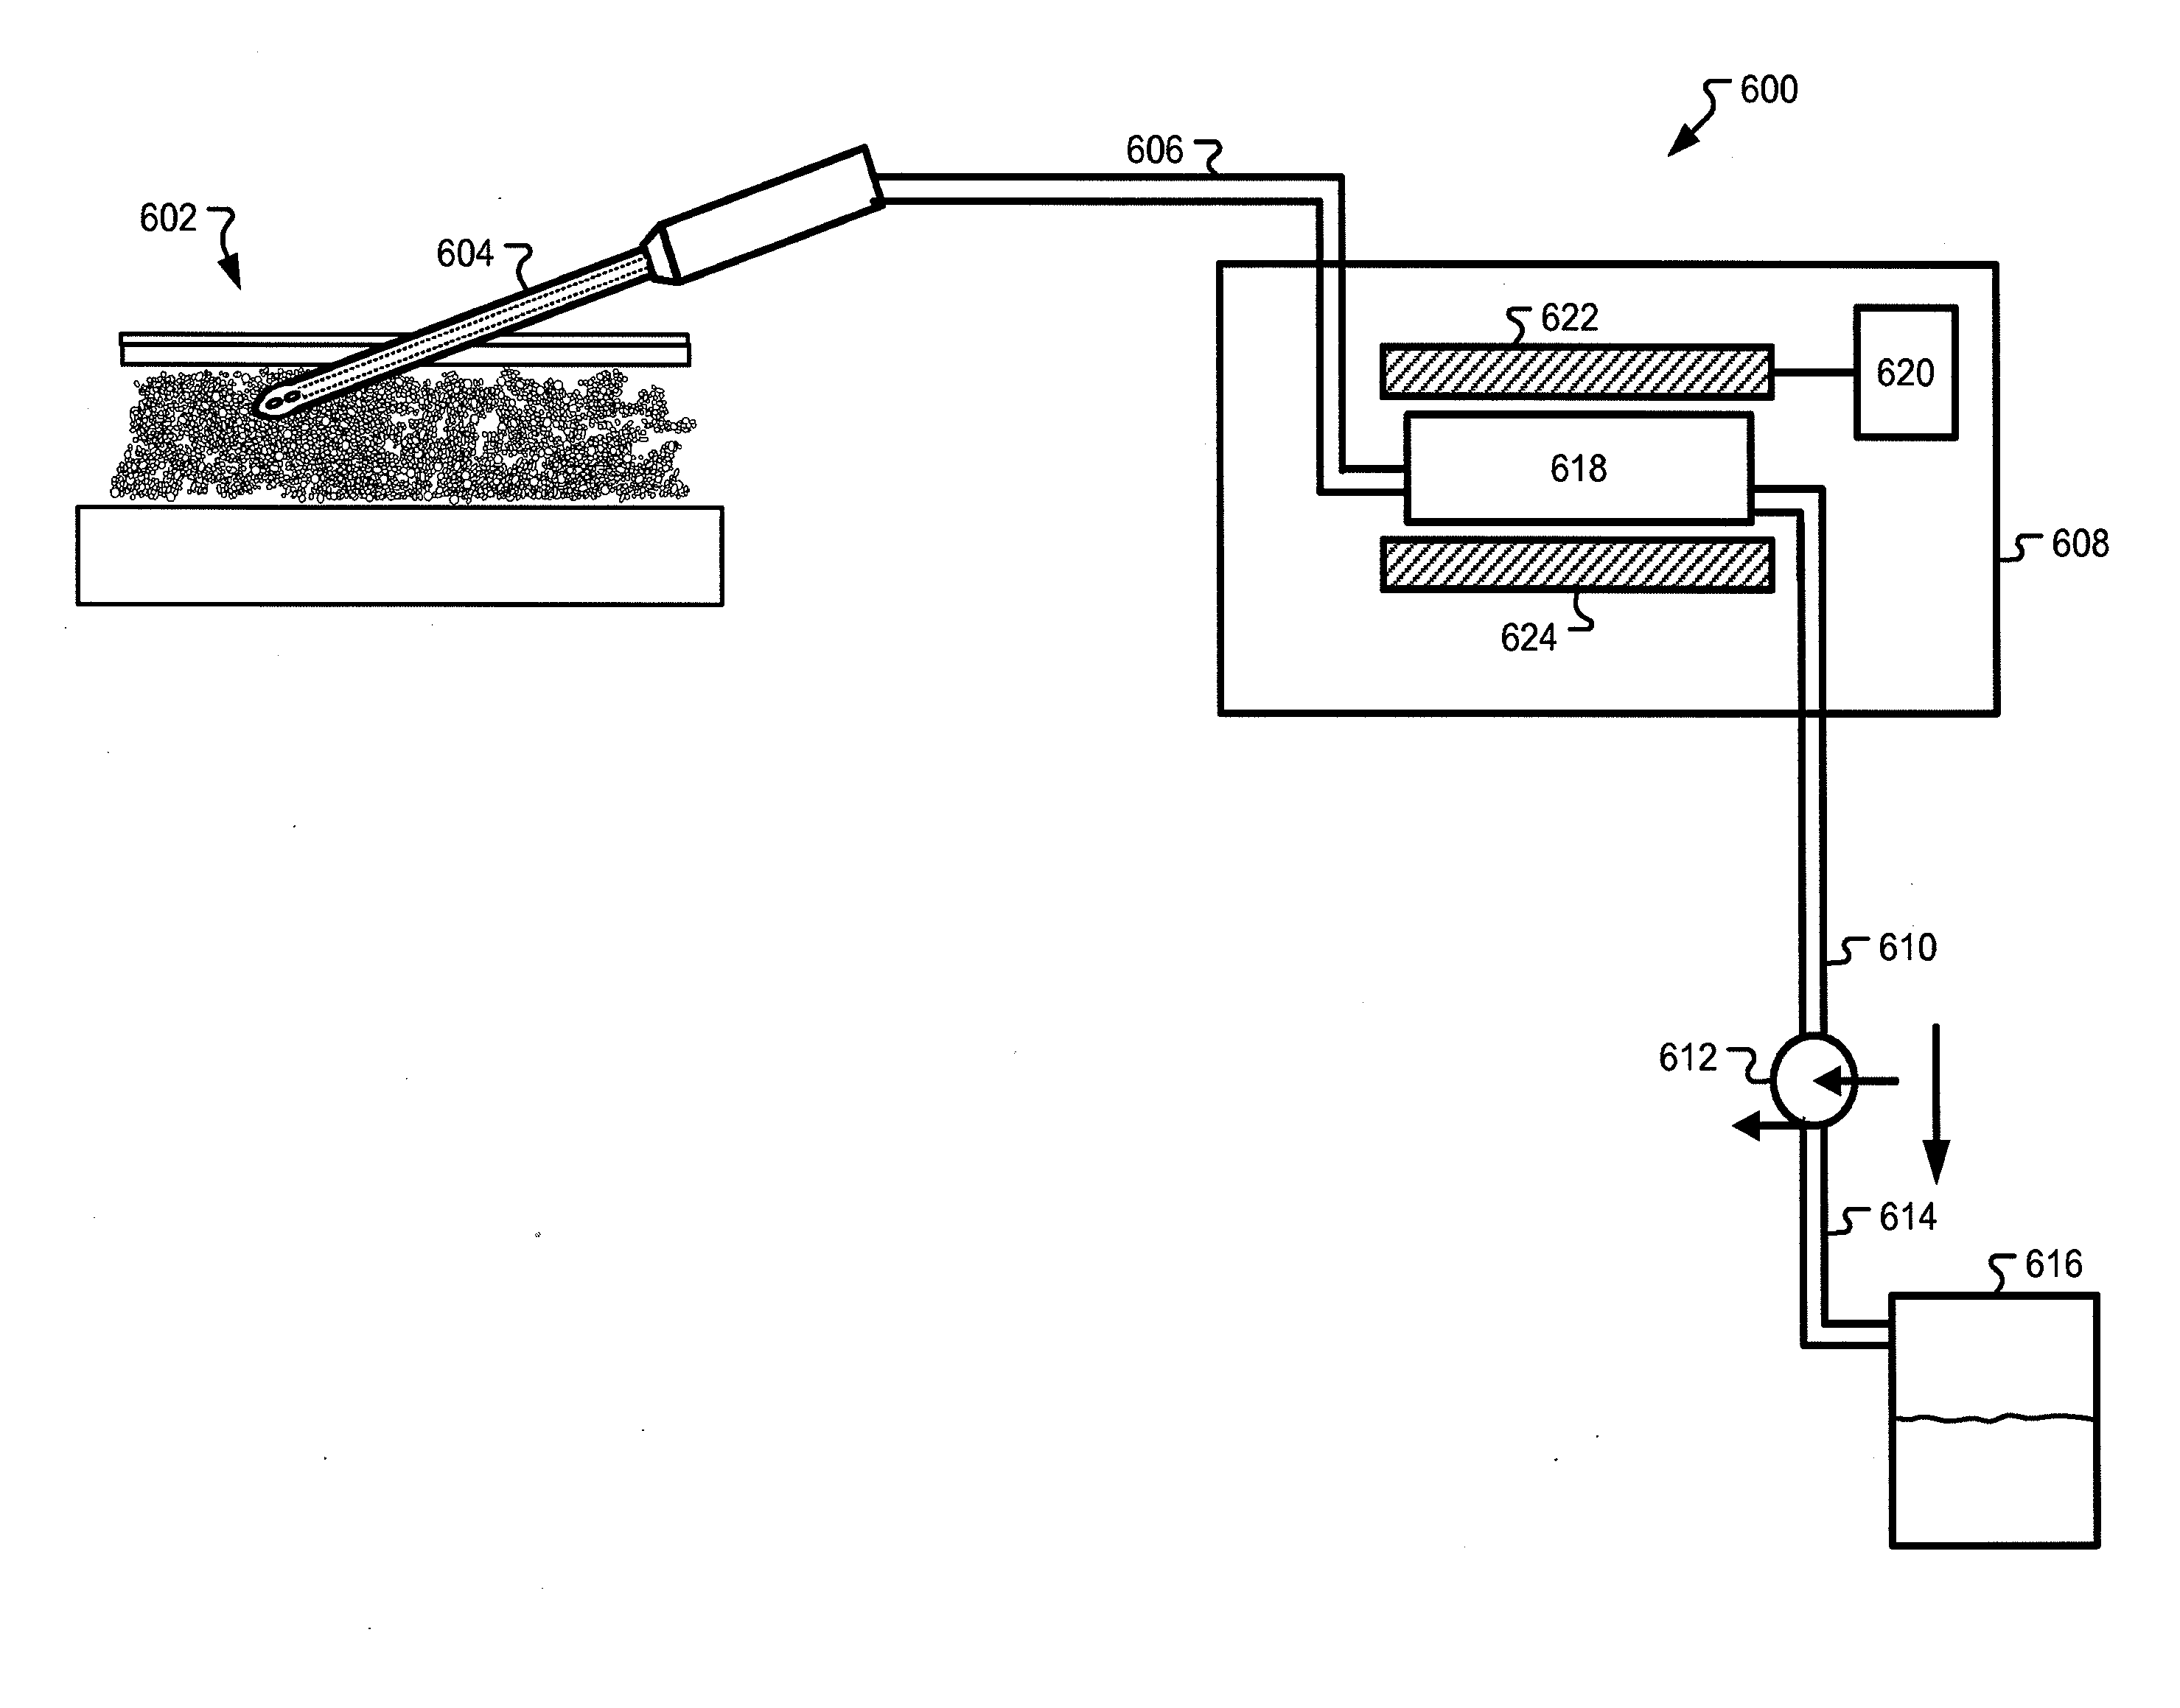 Selective lysing of cells using ultrasound